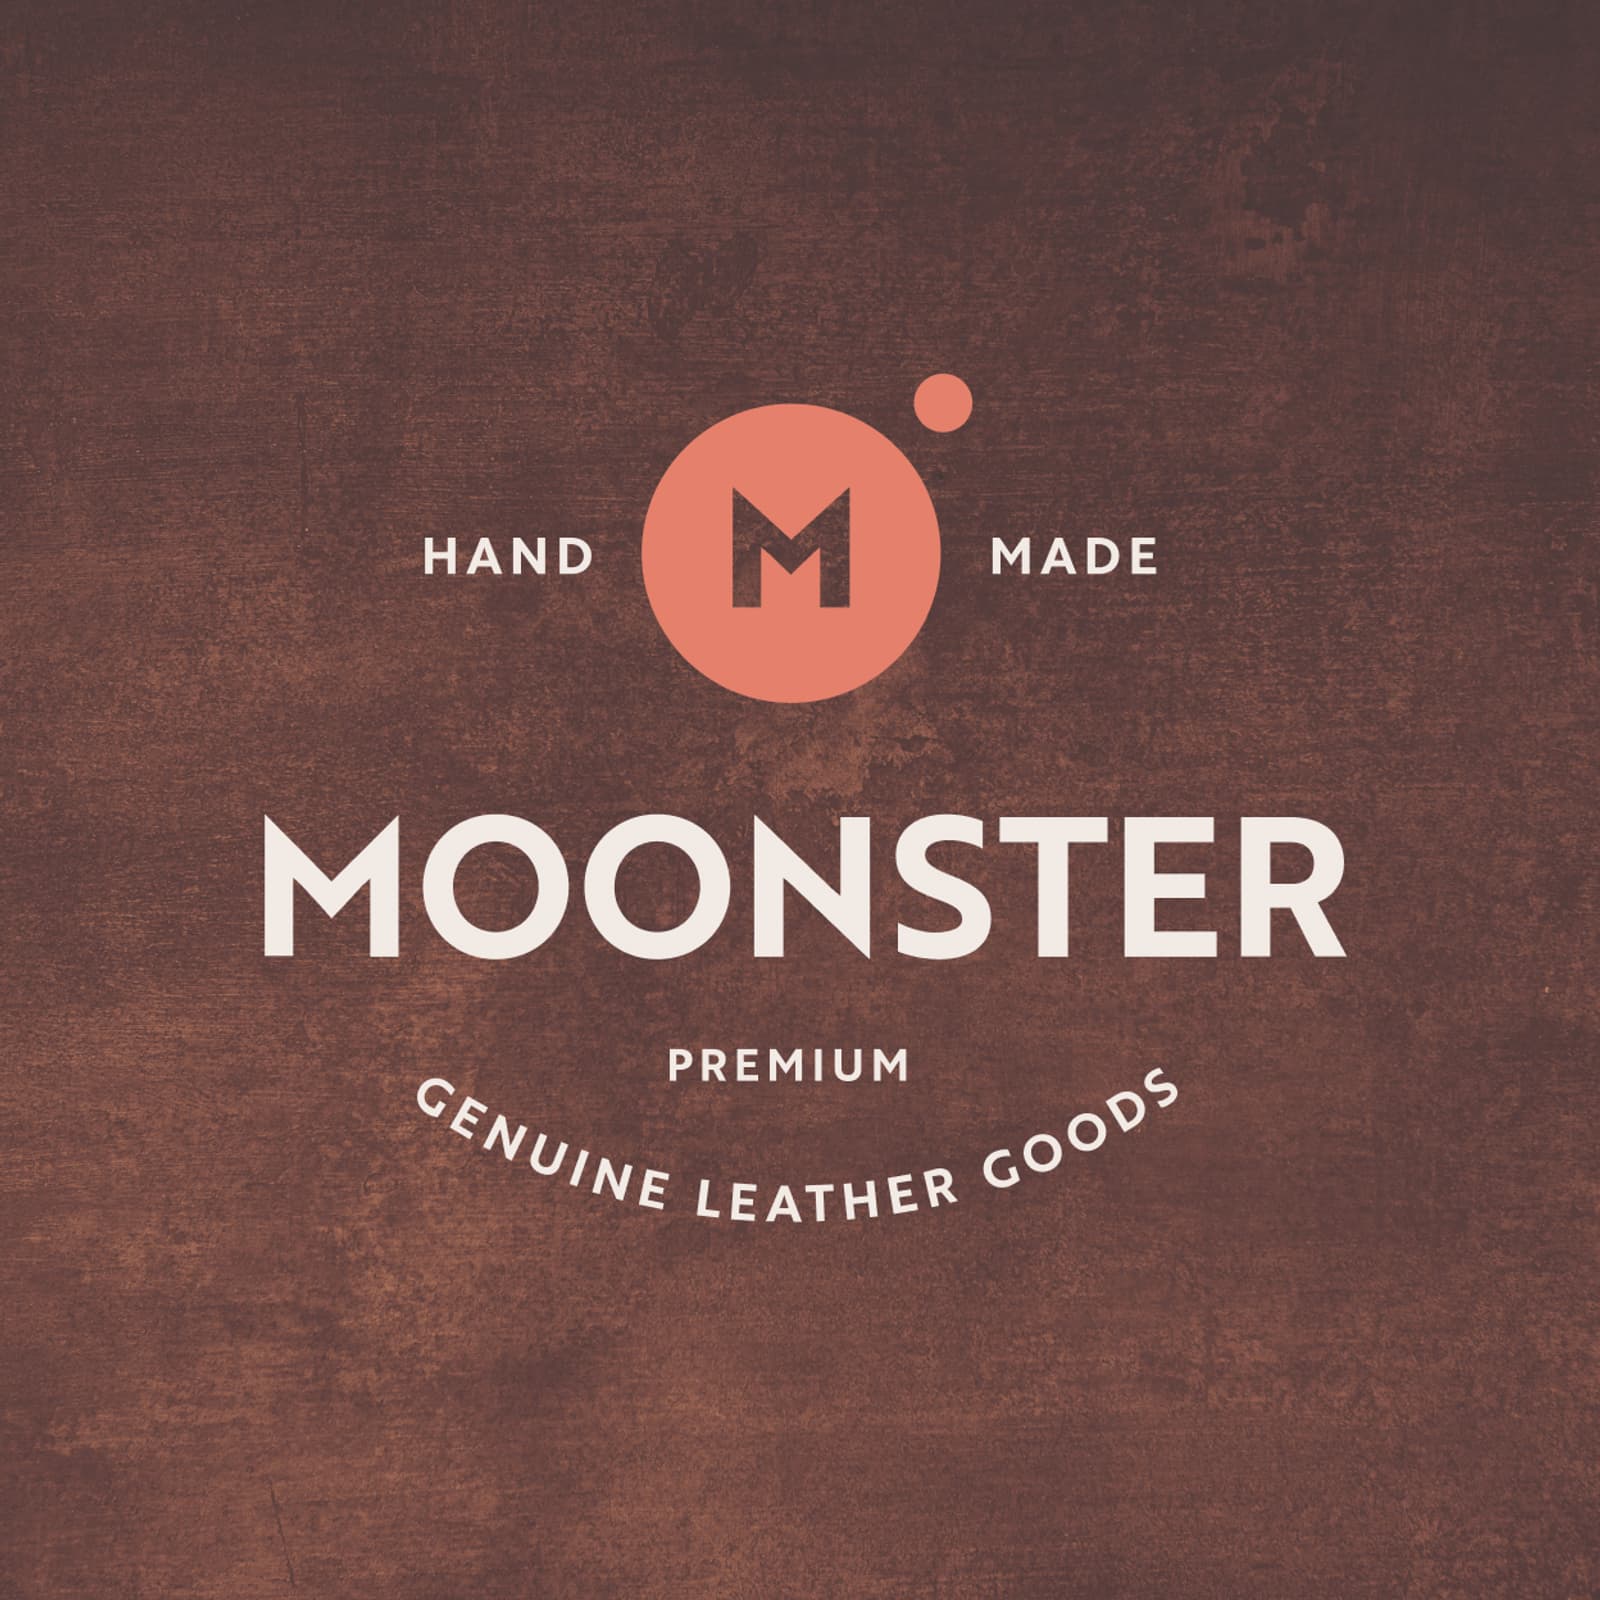 Moonster feature